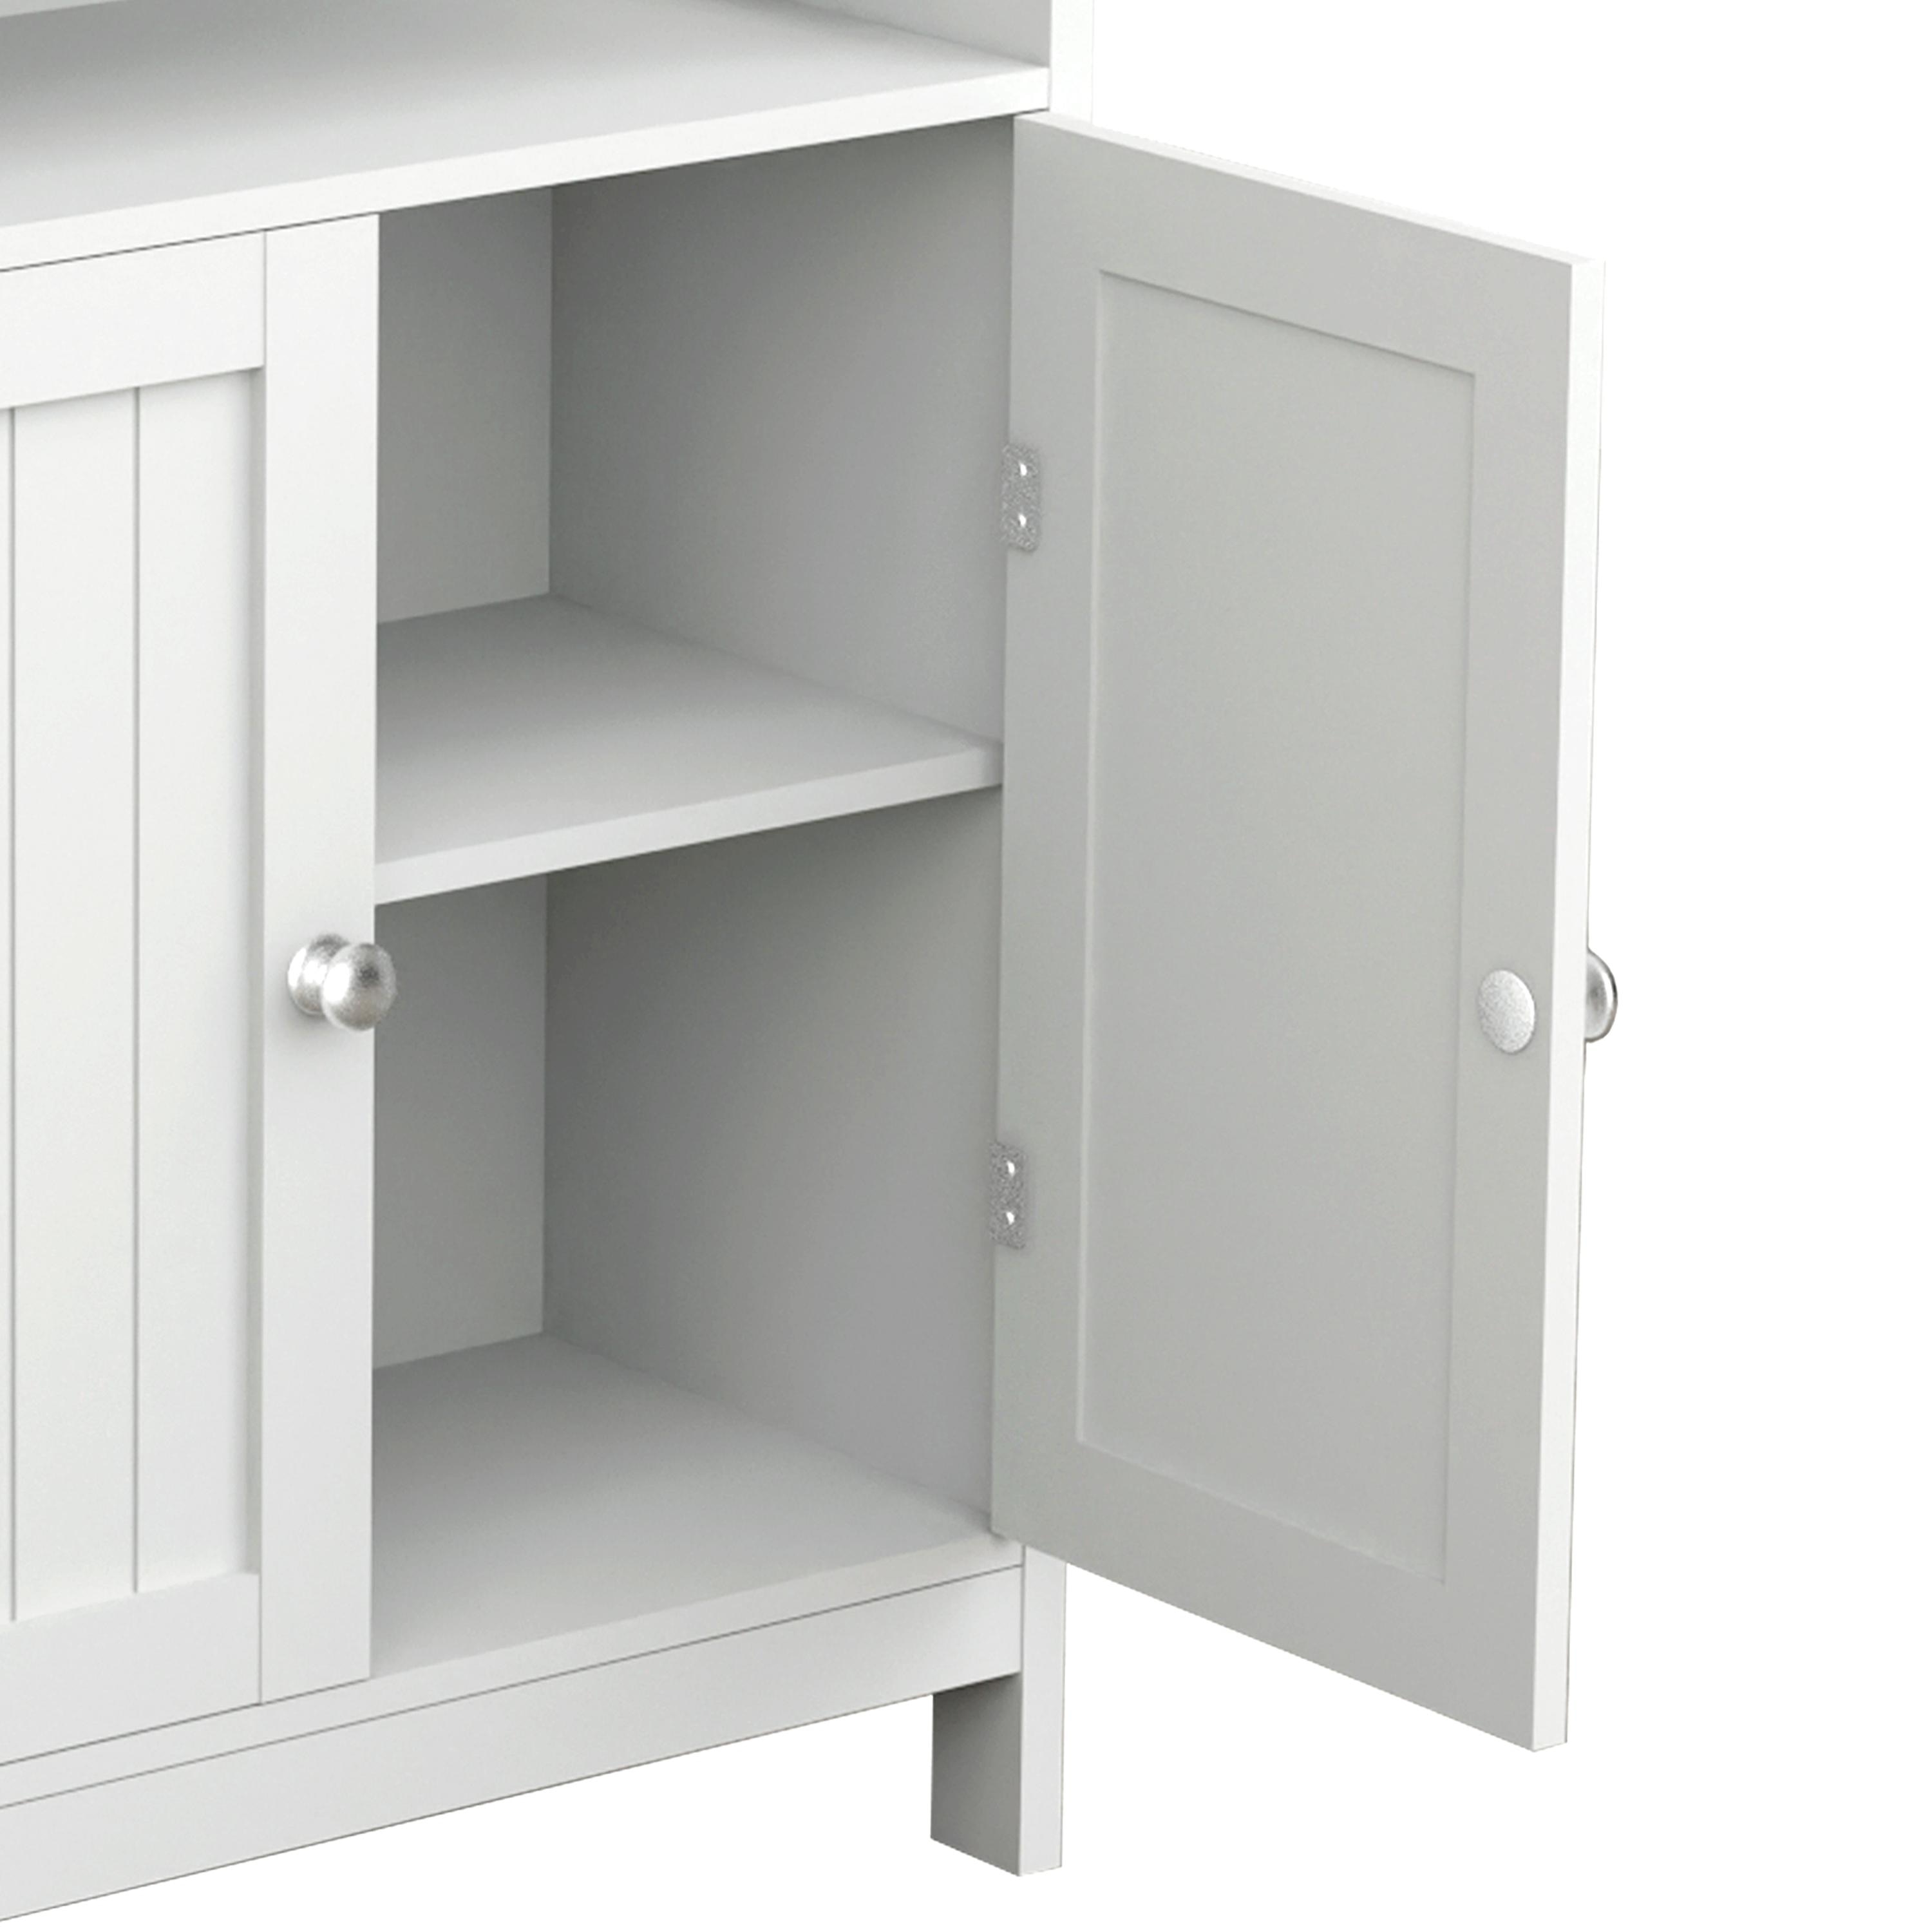 https://ak1.ostkcdn.com/images/products/is/images/direct/7e46bc1f87879ae9a29675e14e2478f0ec8be515/Bathroom-standing-storage-cabinet.jpg